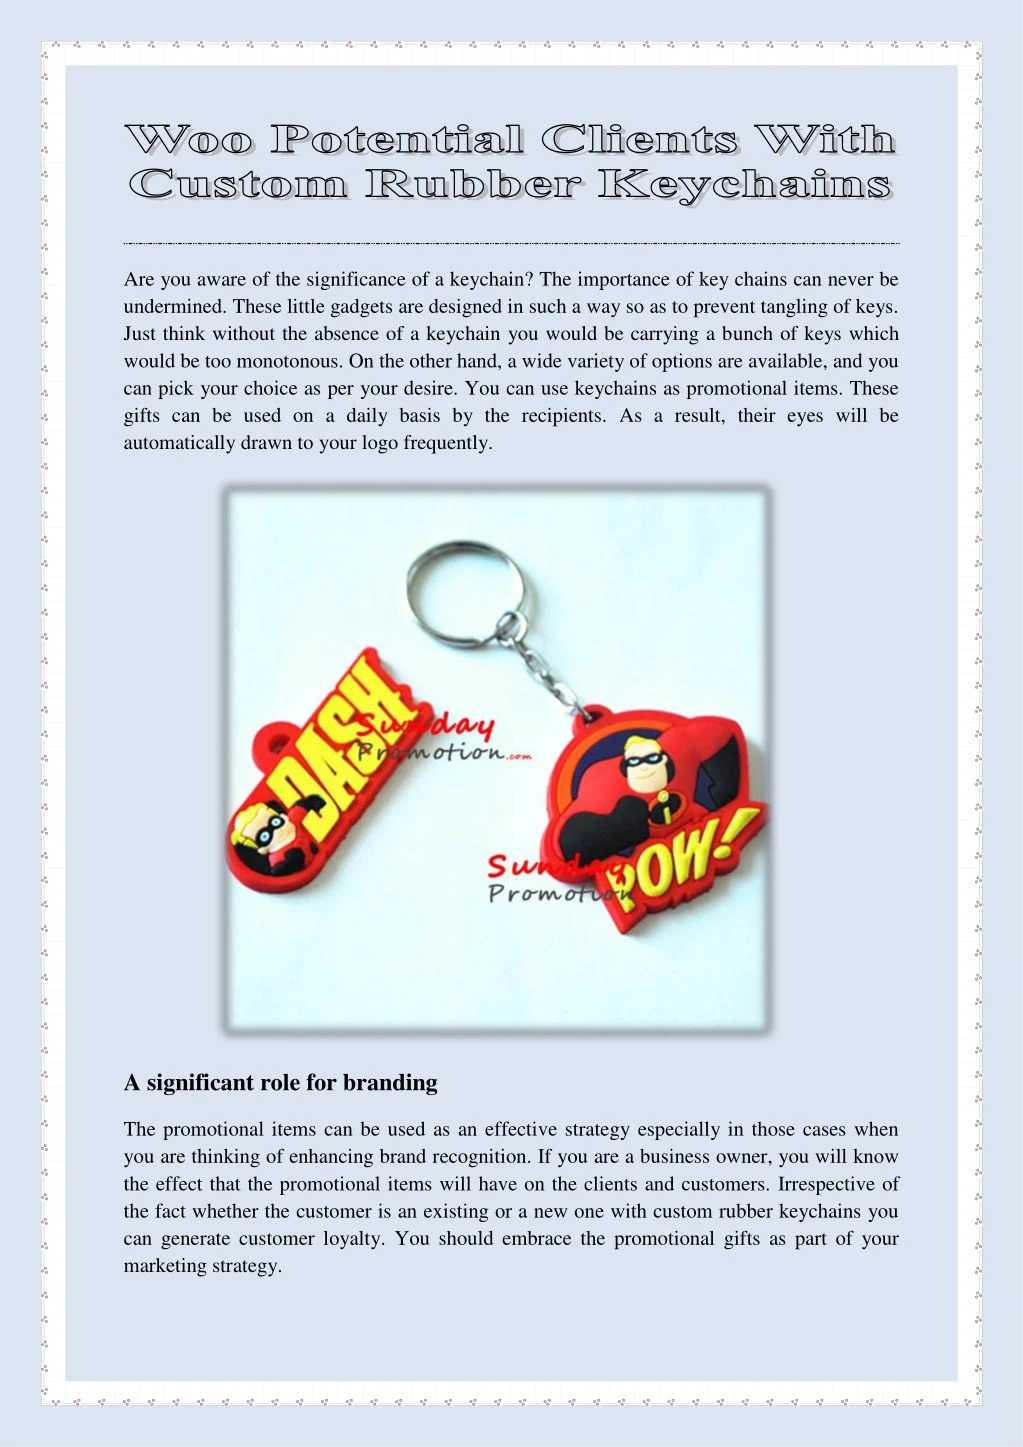 are you aware of the significance of a keychain